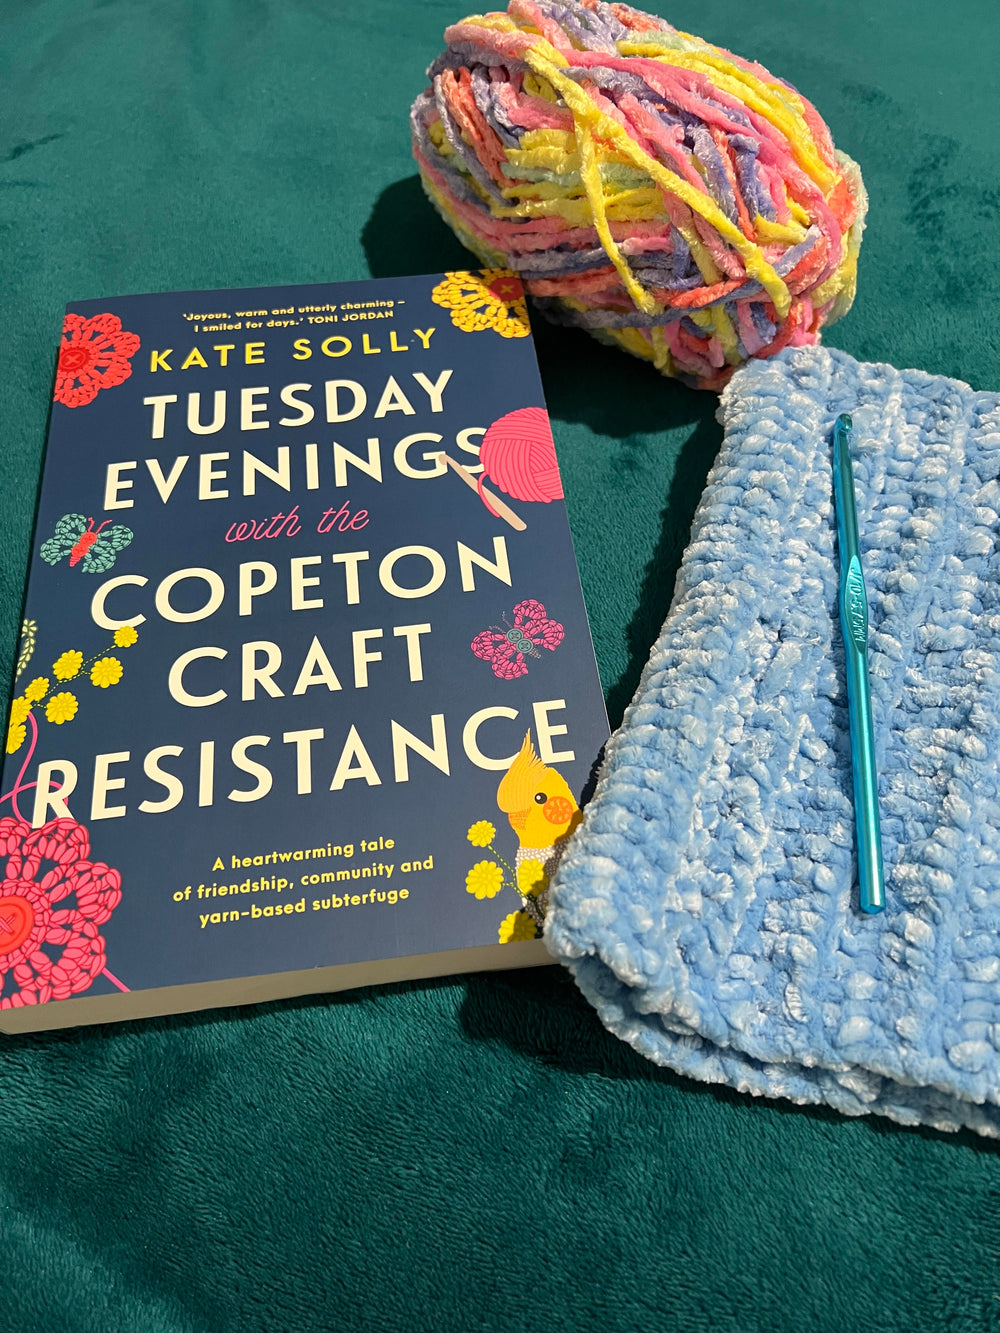 Tuesday Evenings with the Copeton Craft Resistance - Kate Solly